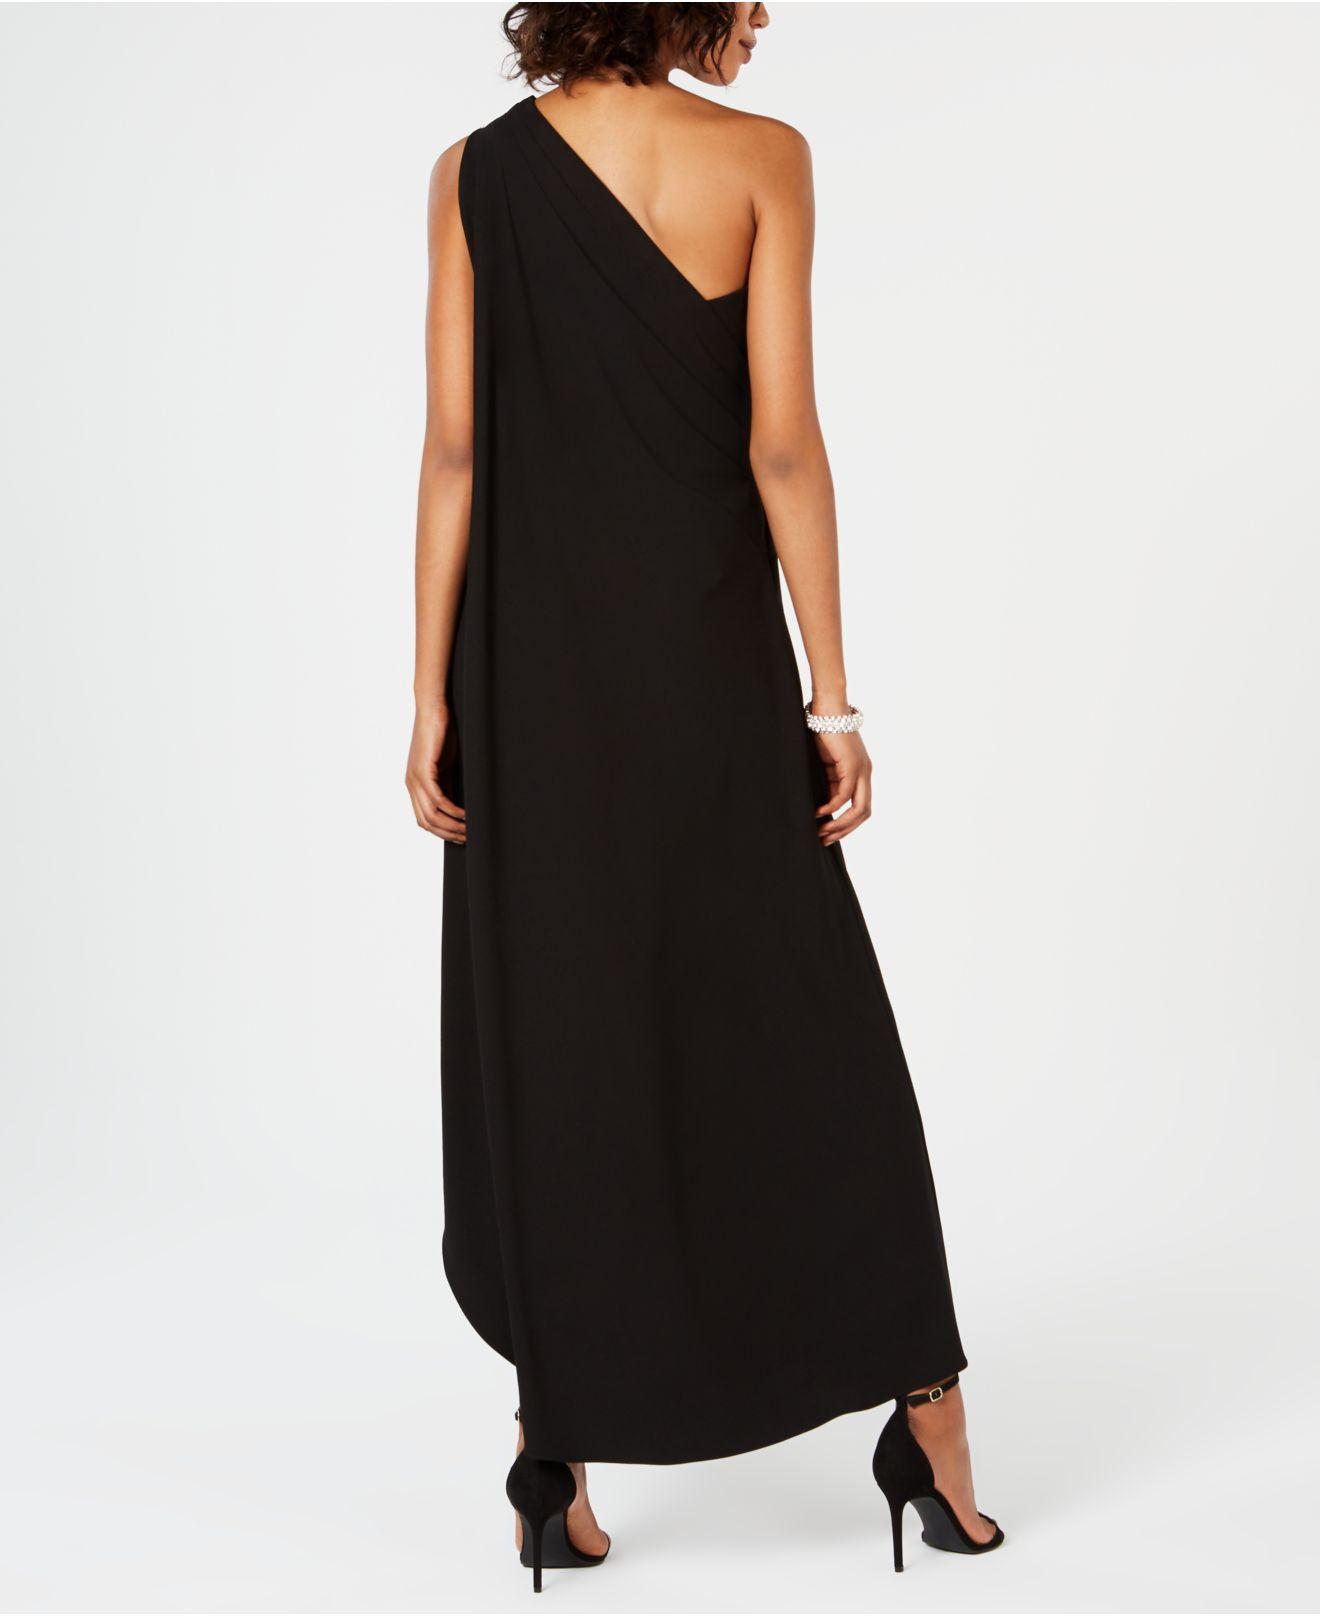 Adrianna Papell Synthetic One-shoulder Crepe Jumpsuit in Black - Lyst